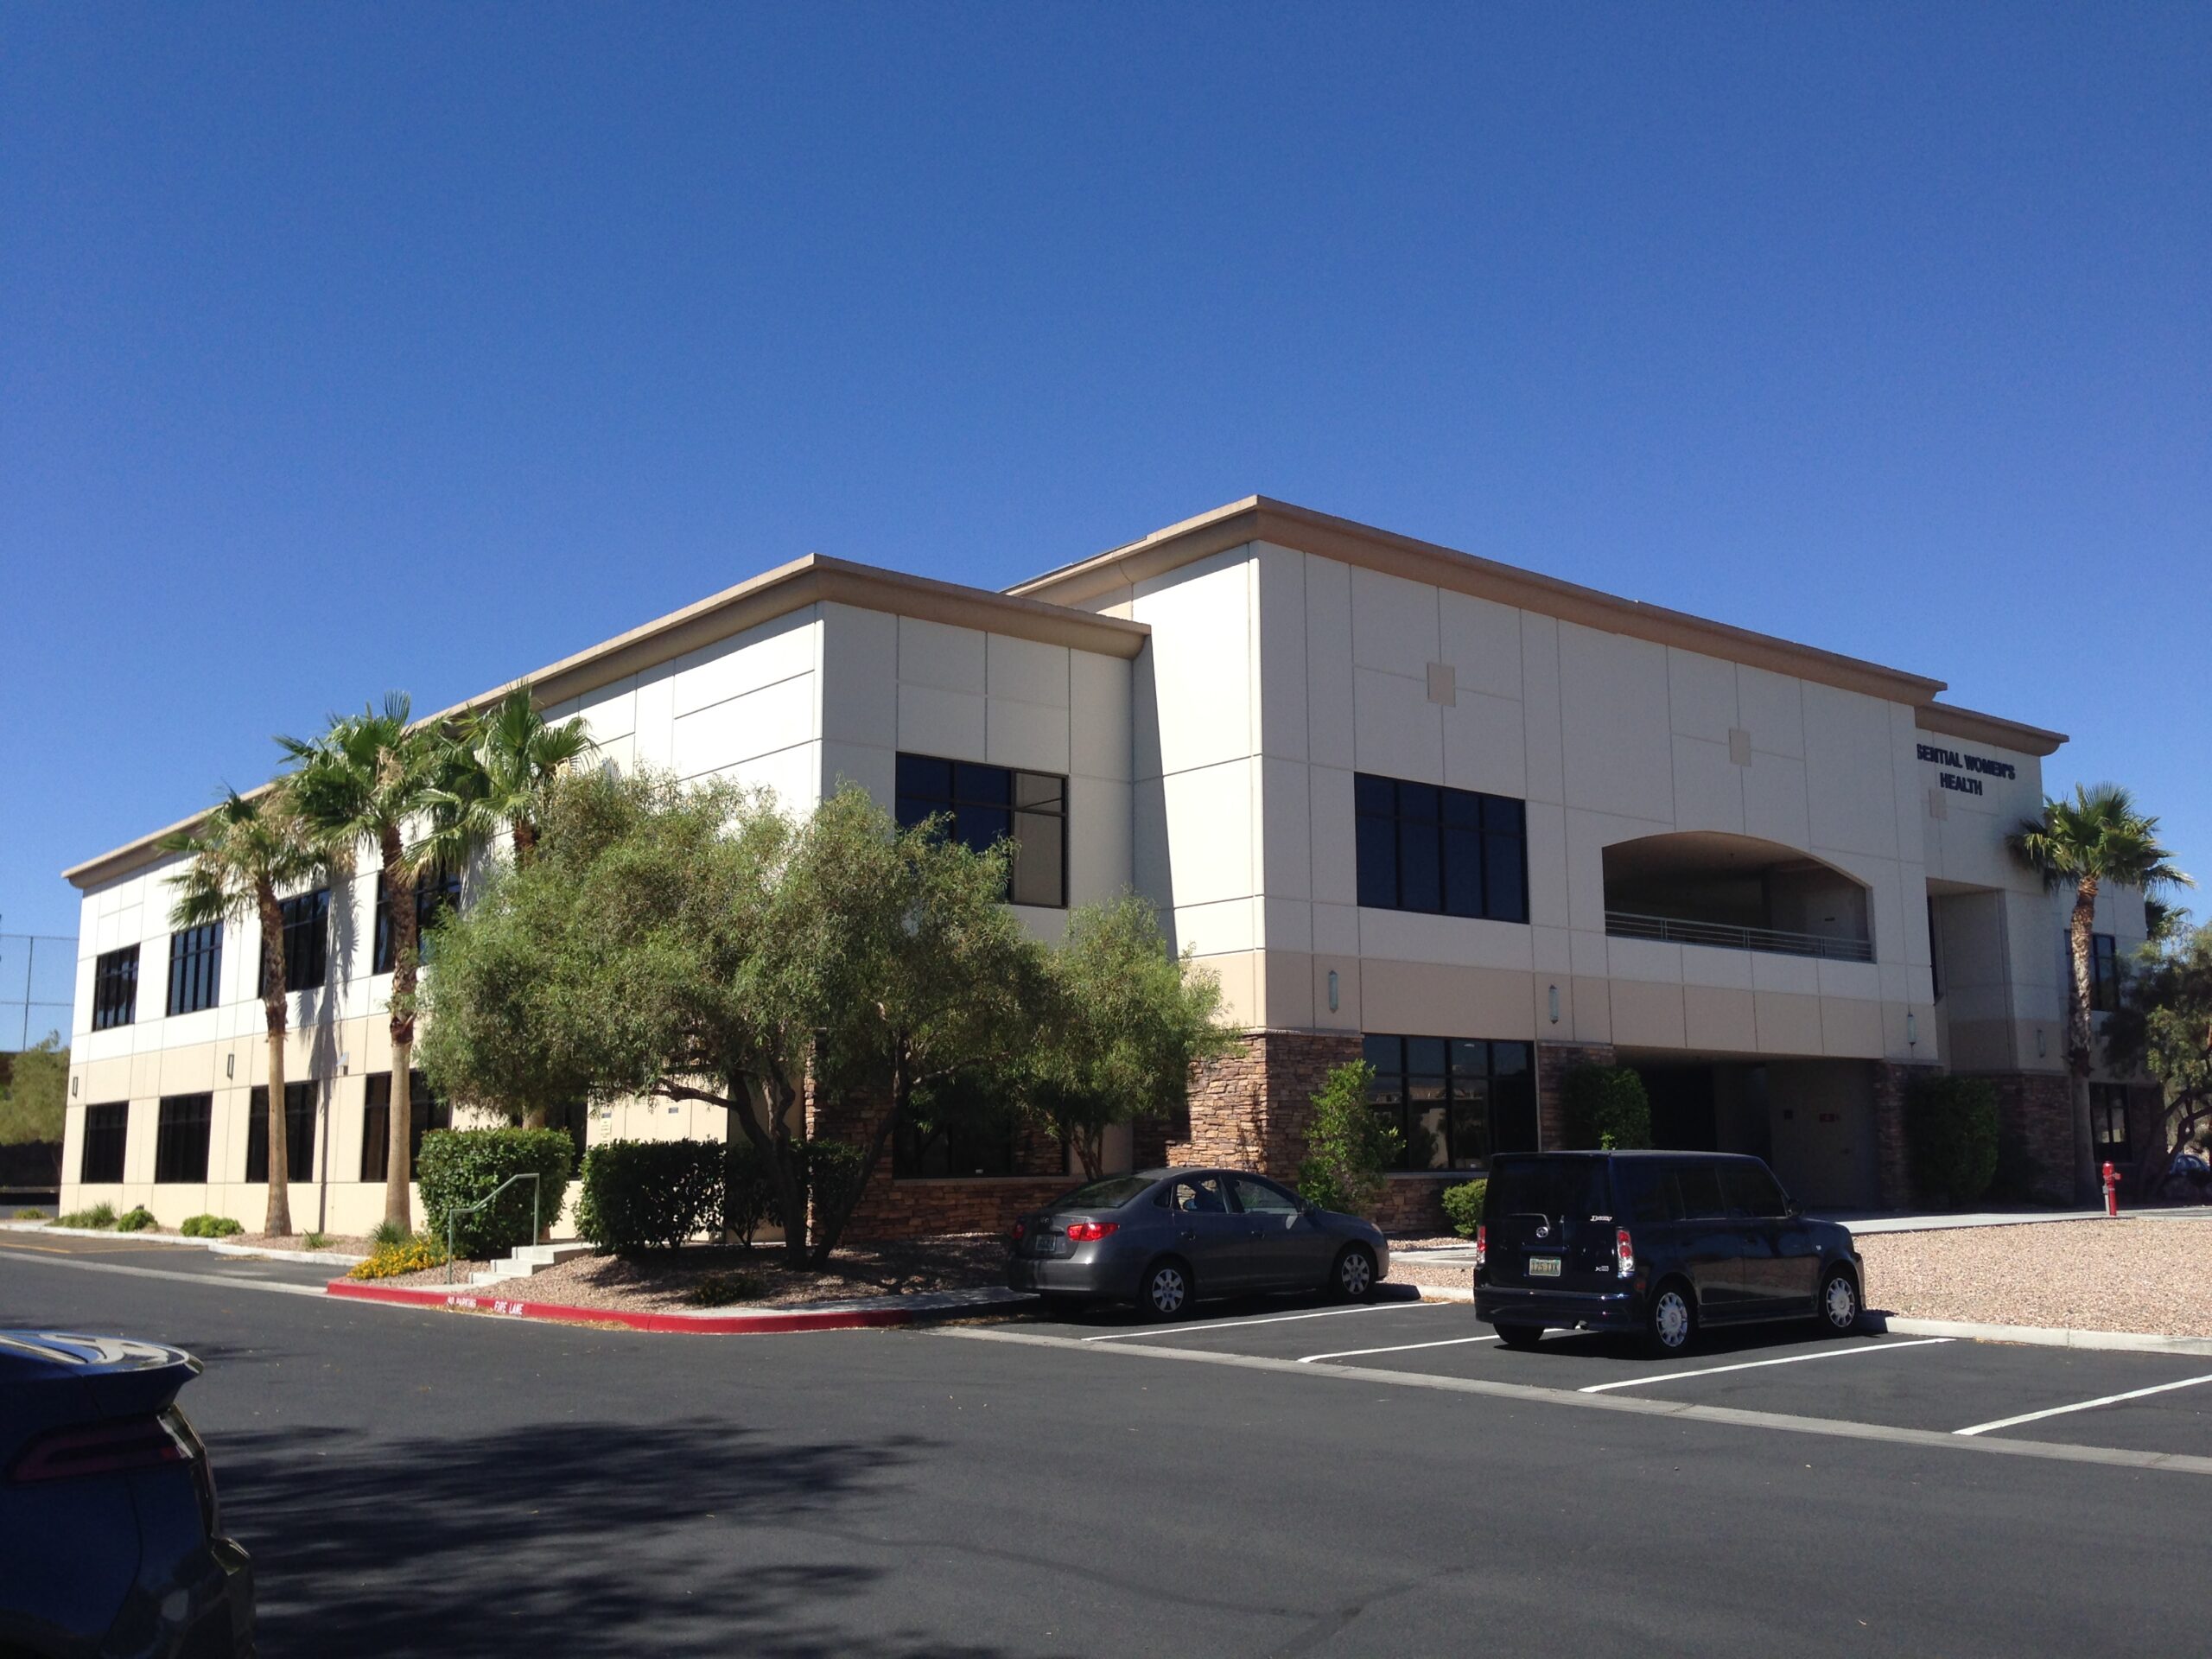 Colliers International – Las Vegas finalized a lease of a 2,635-square-foot medical office property located in the Coronado Point Office Park in Henderson.